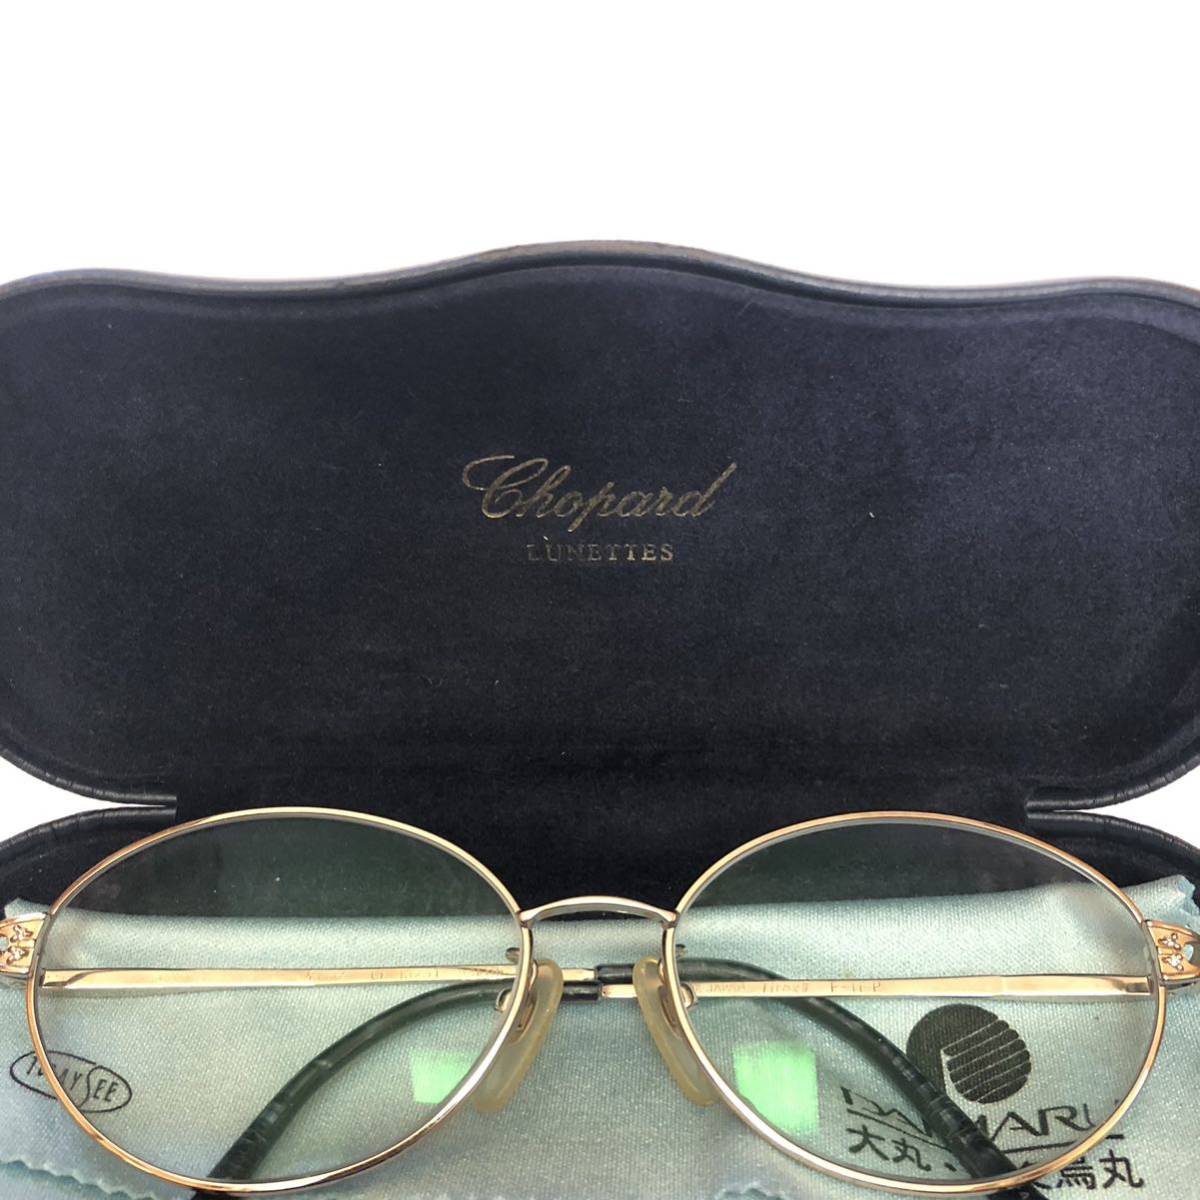 [ Chopard ] genuine article glasses lady's times entering glasses case attaching Cross attaching secondhand goods -117 nationwide equal postage 870 jpy 